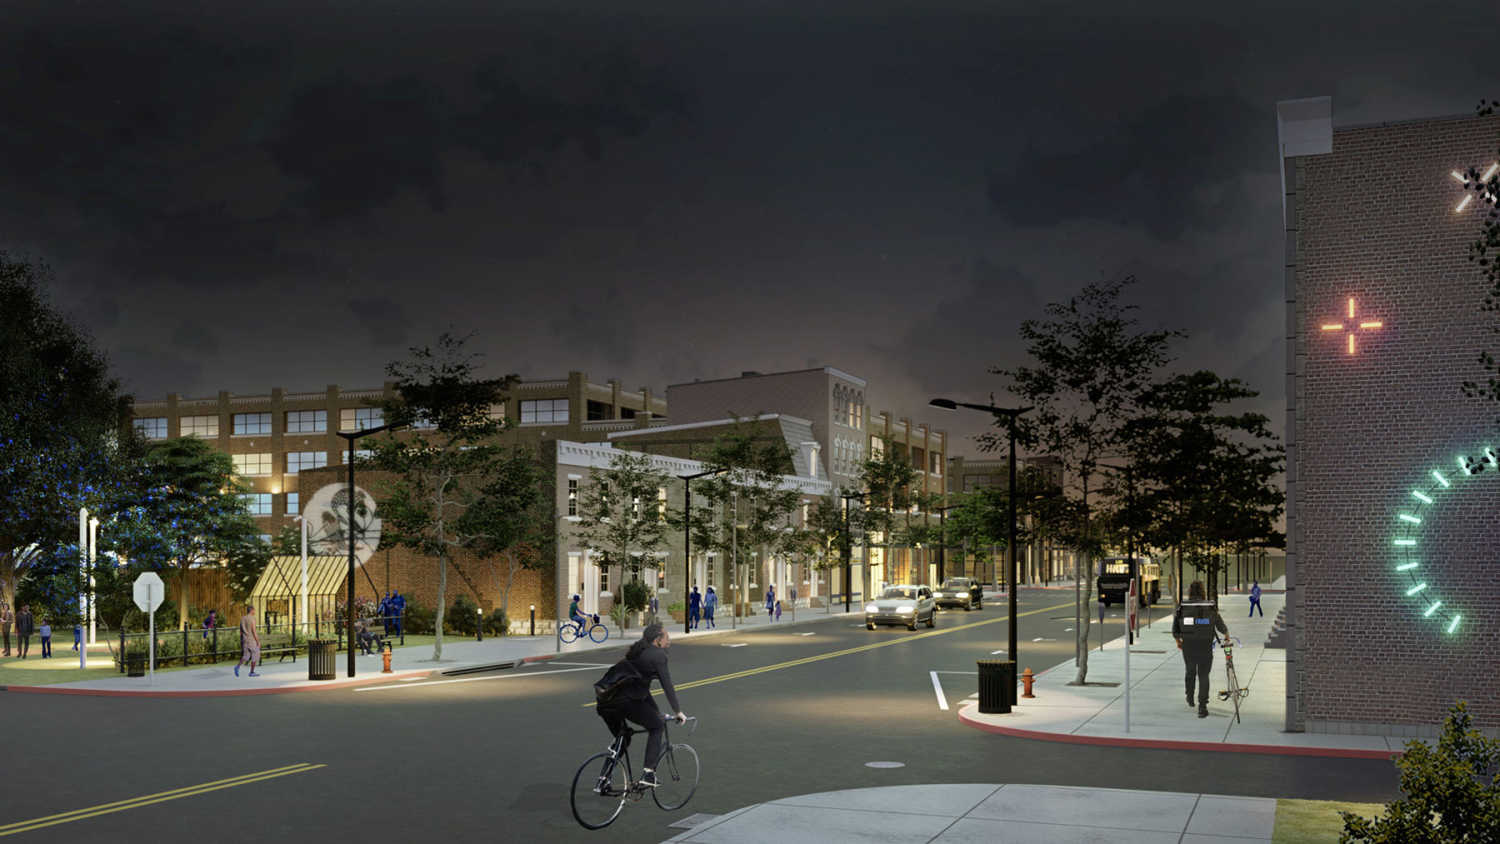 This rendering by PI.KL Studio visualizes an inviting nighttime environment that includes many of the
lighting elements, light art installations, and recommendations from the Signal Station North Lighting Plan.